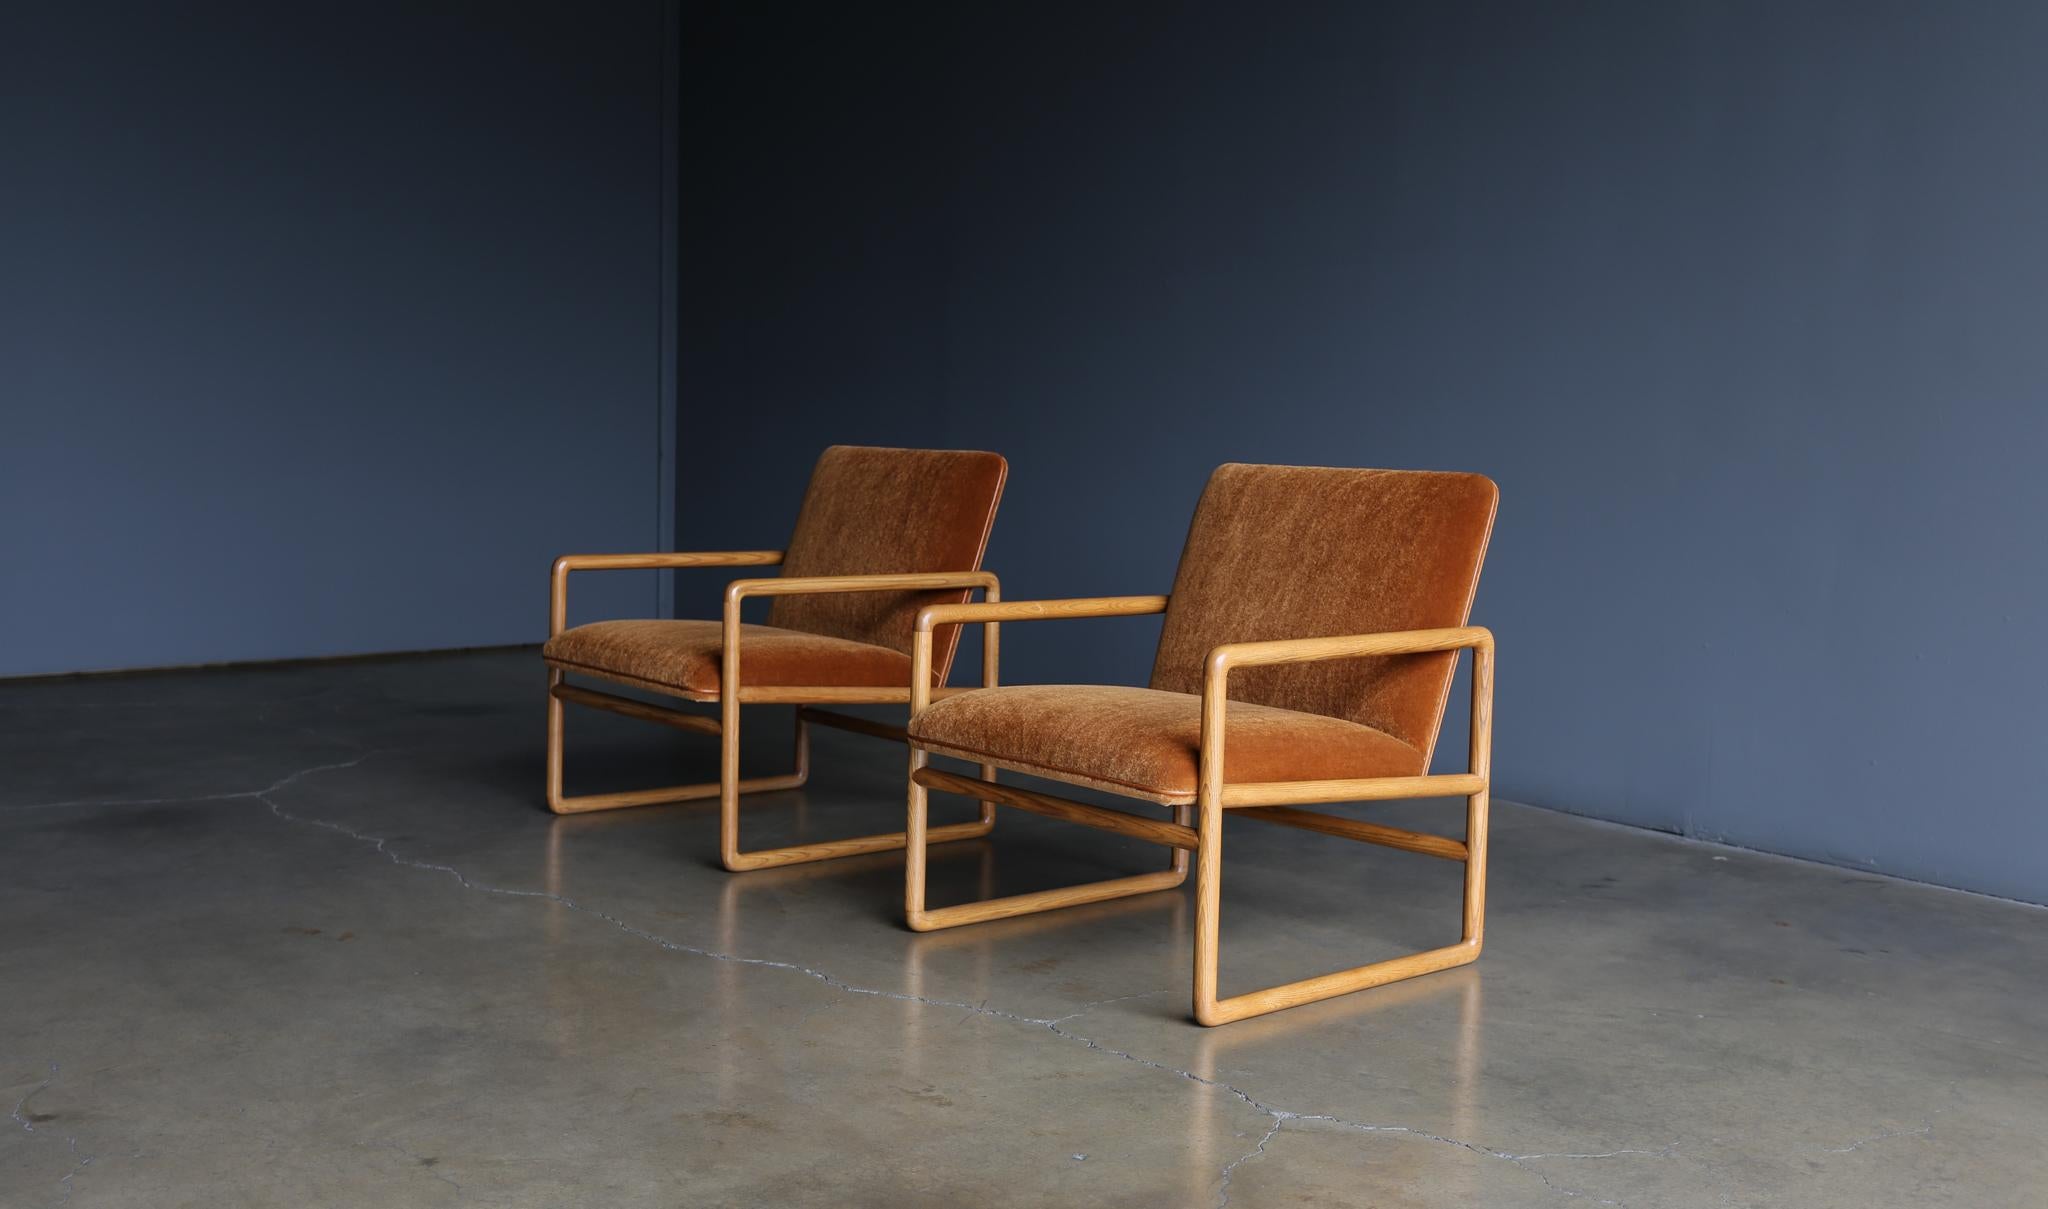 Ward Bennett Model 1226 oak & mohair lounge chairs for Brickel Associates, circa 1960. Cinnamon mohair upholstery with caramel leather piping. Restored solid oak frames.